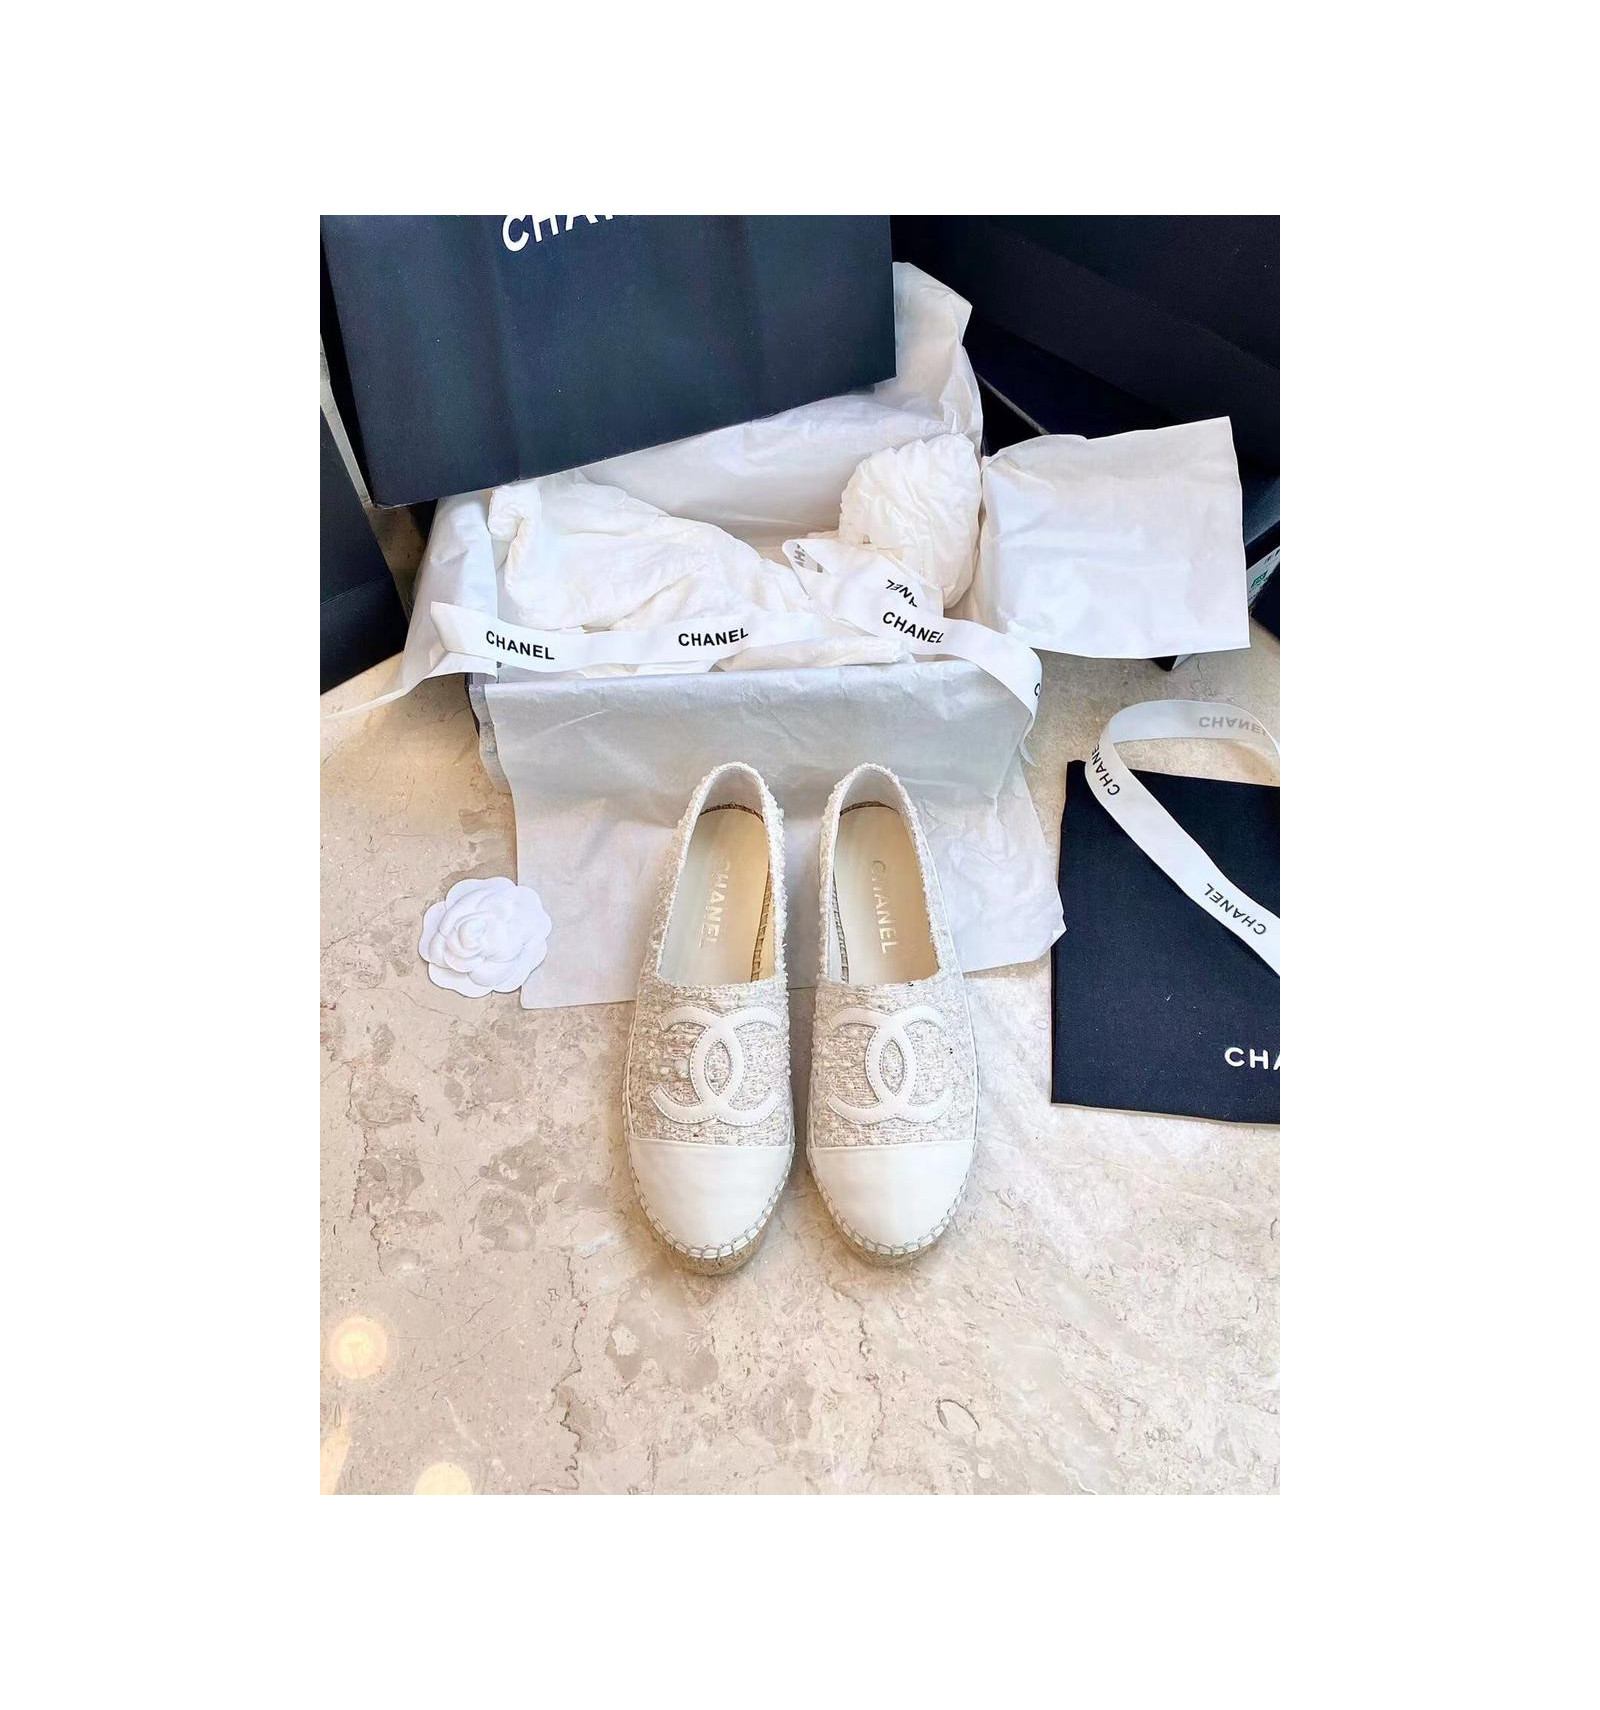 CHANEL CC Pearlized Ivory Espadrilles 36 More Than You Can, 59% OFF